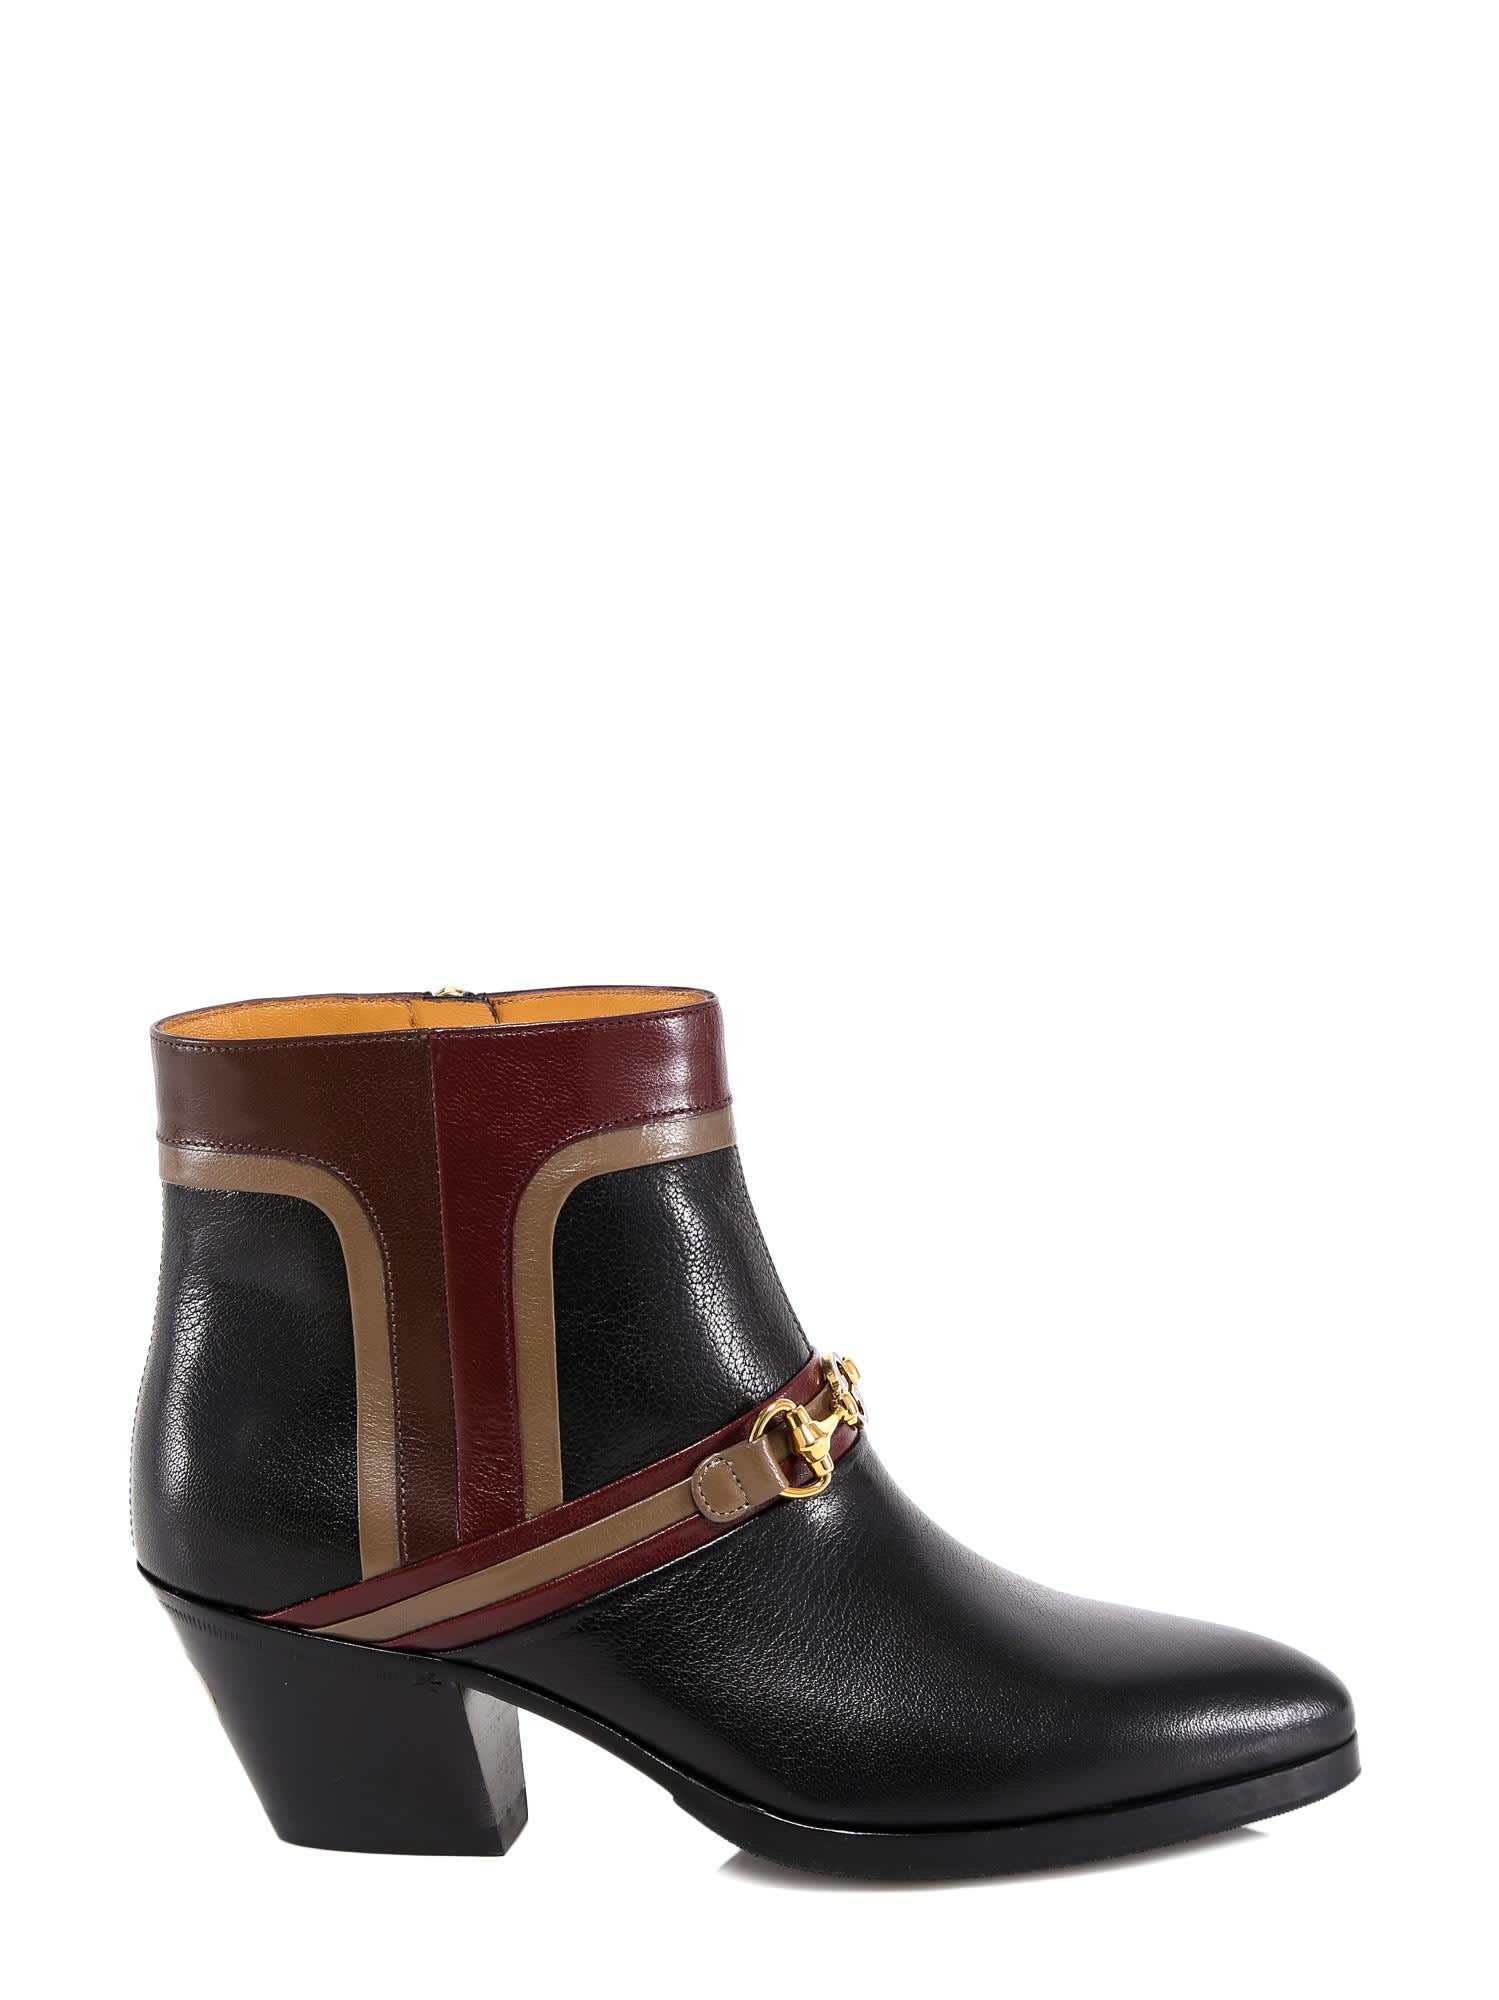 Buy Gucci Interlocking G Horsebit Boots online, shop Gucci shoes with free shipping